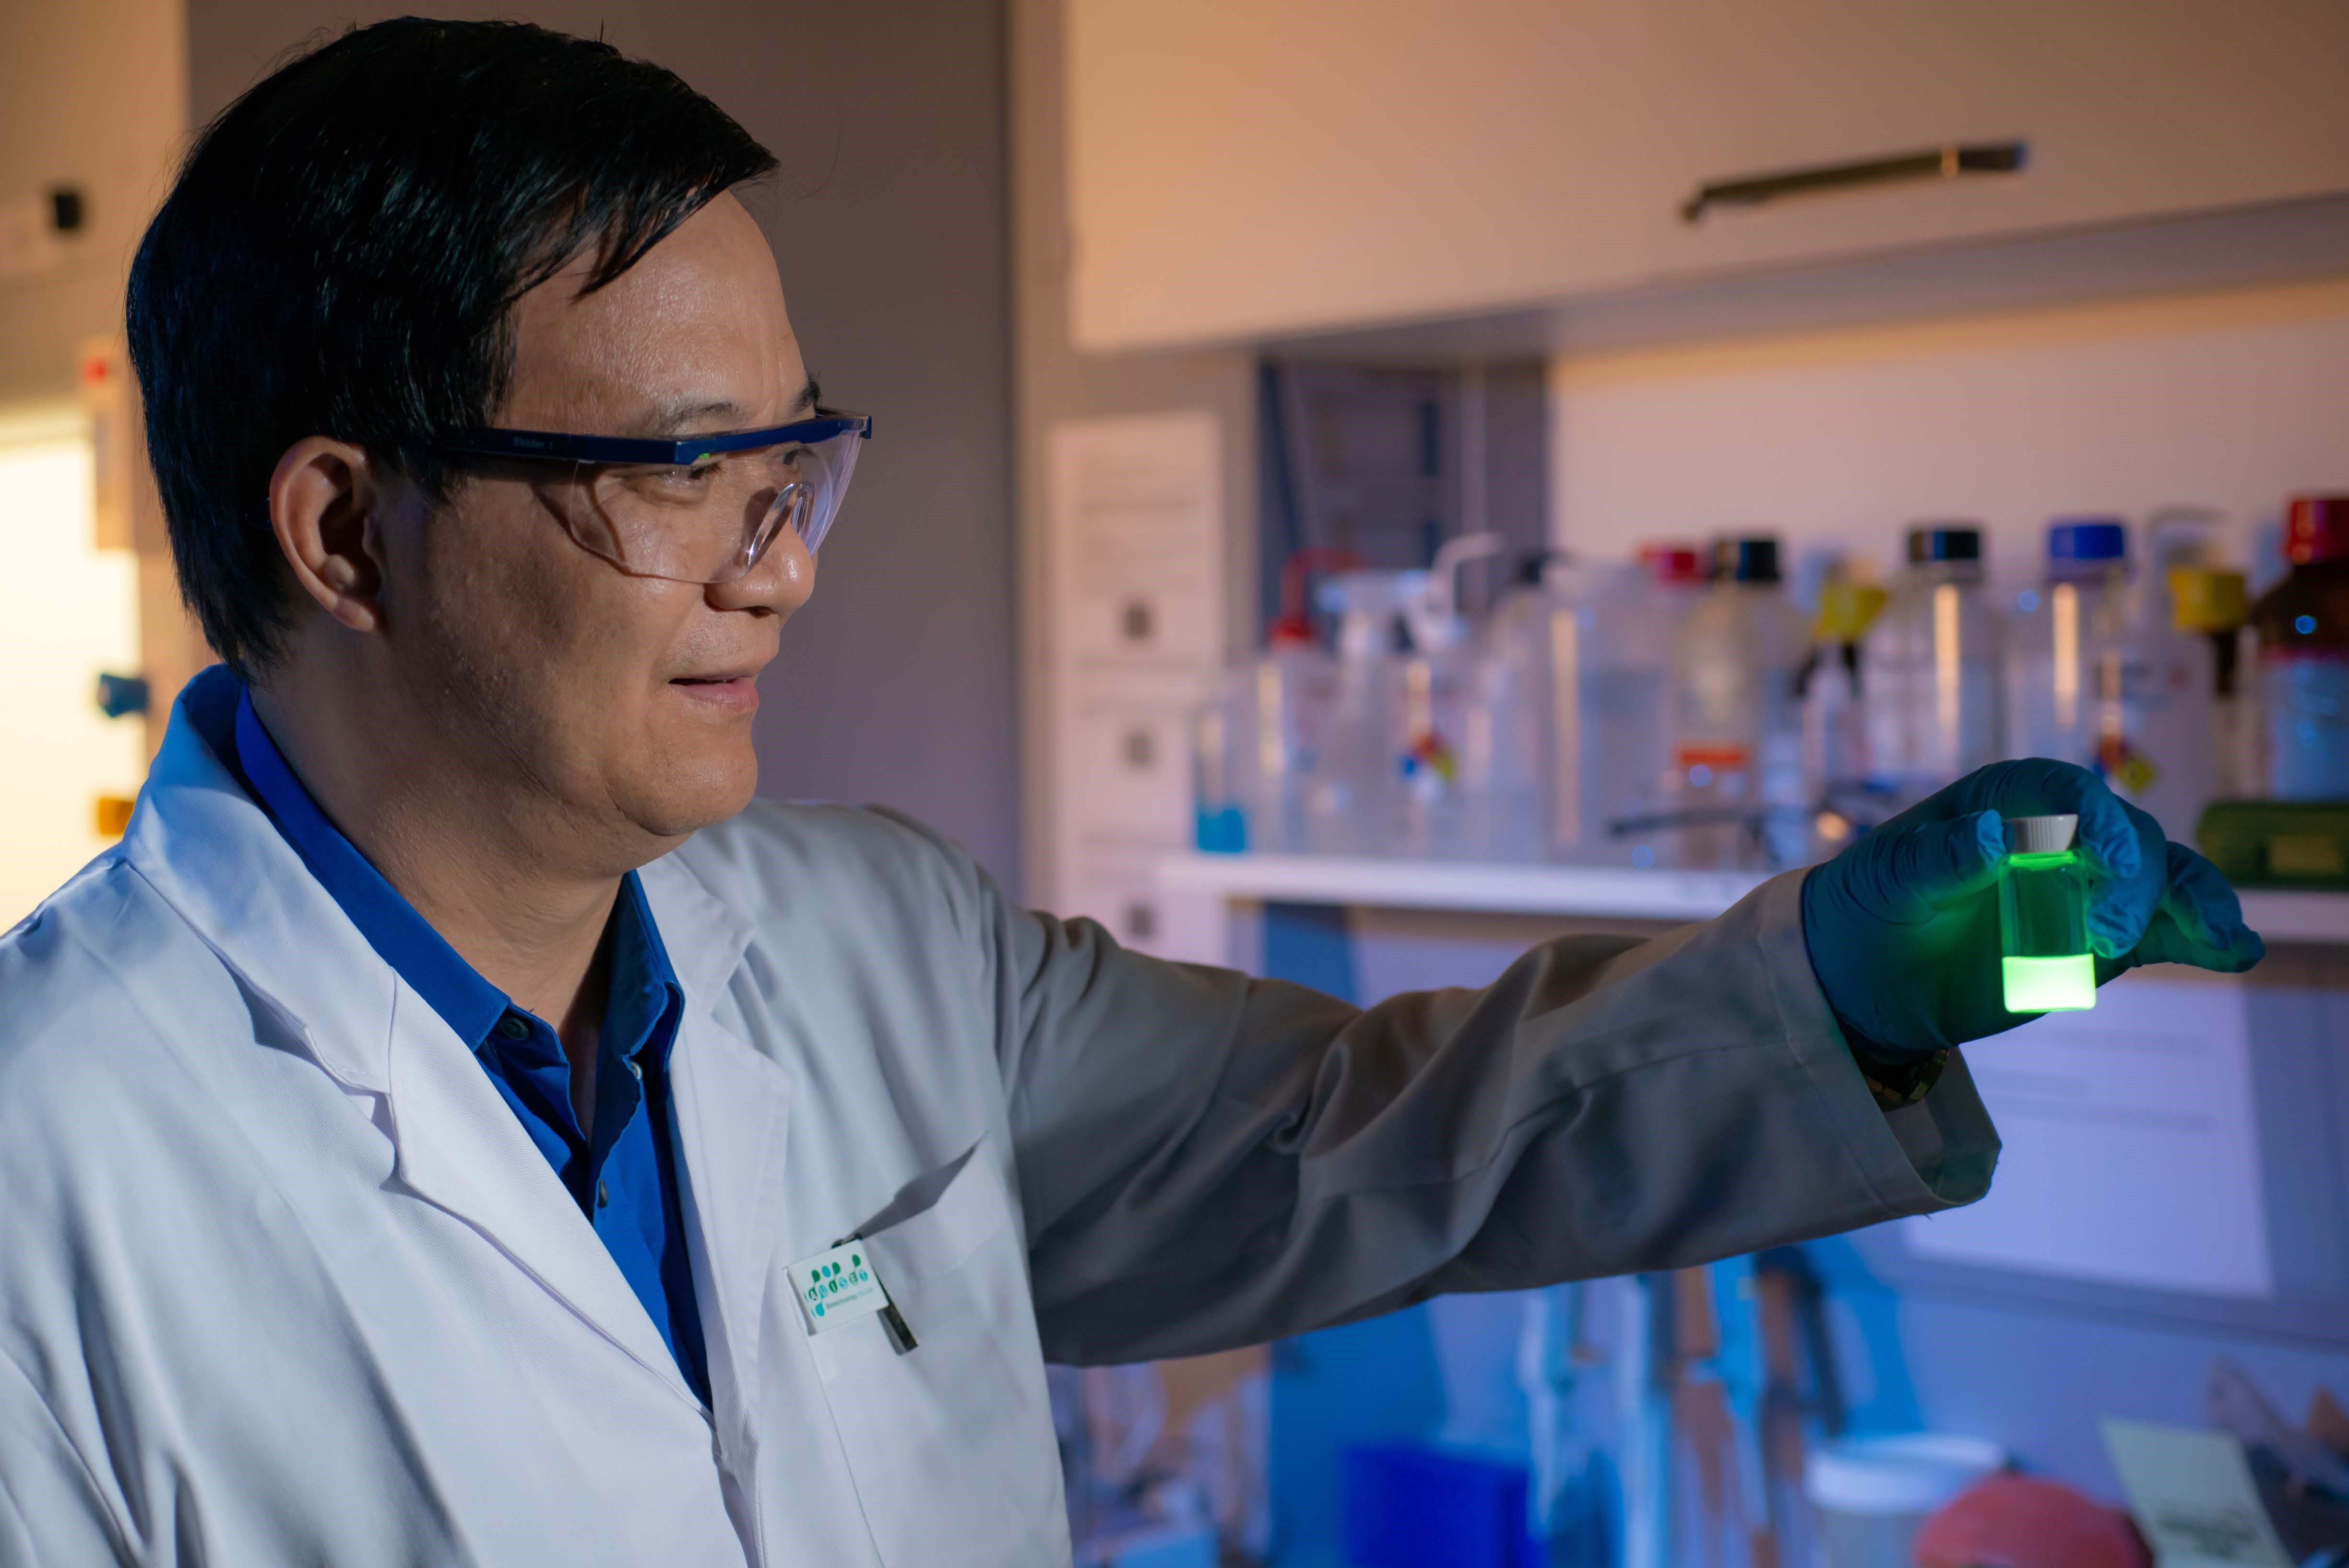 Since 2001, Prof. Tang has been researching on the unique photophysical phenomenon of AIE, leading to the development of more than 200 high-performance fluorescent materials with wide-ranging applications.